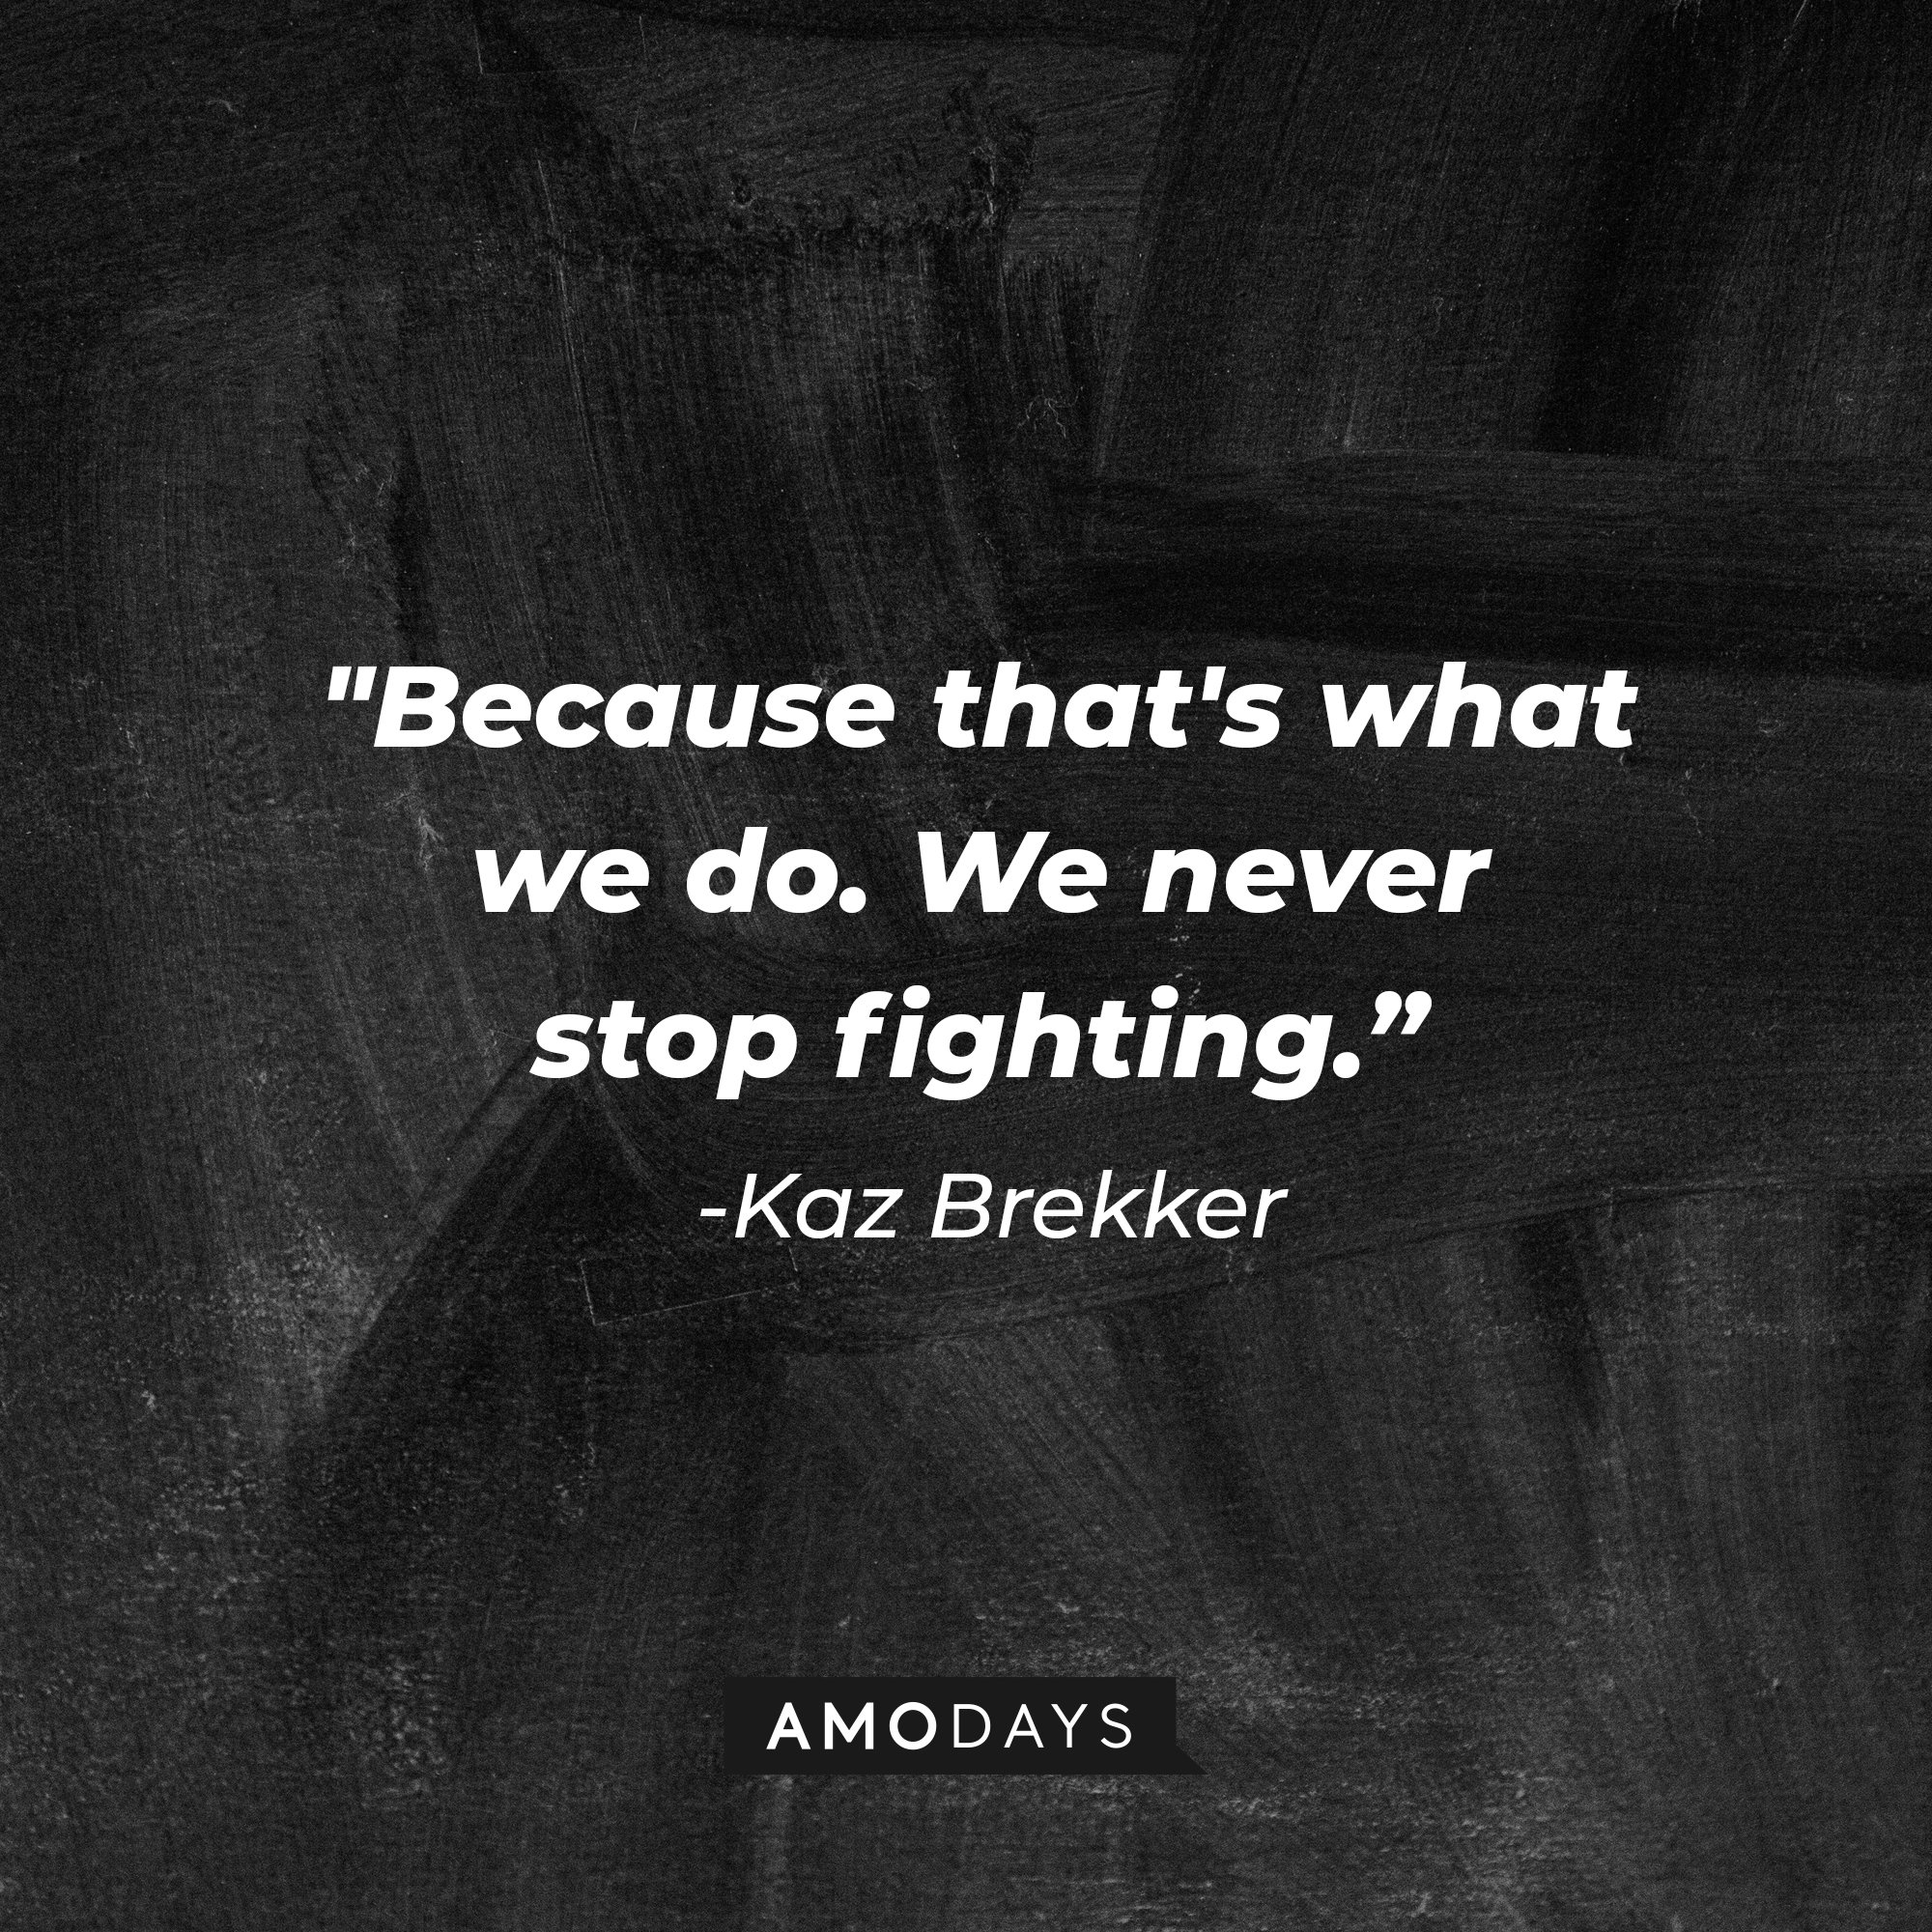 Kaz Brekker’s quote: “Because that's what we do. We never stop fighting.”  | Image: AmoDays